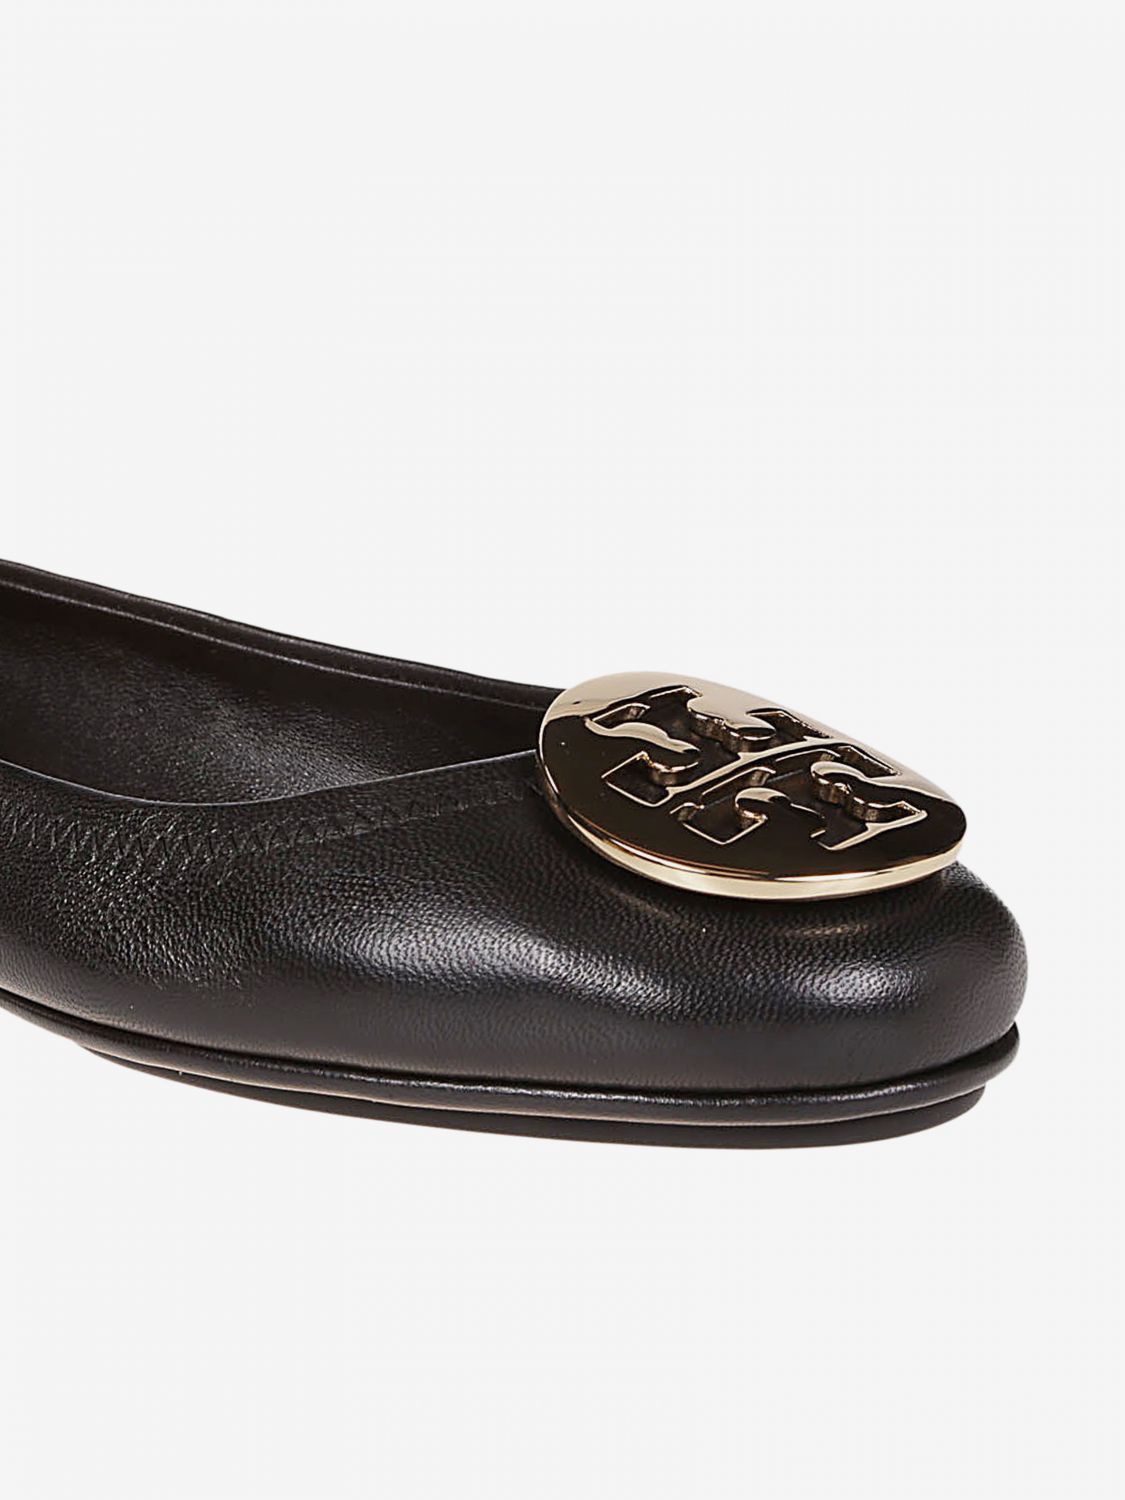 tory burch loafers black